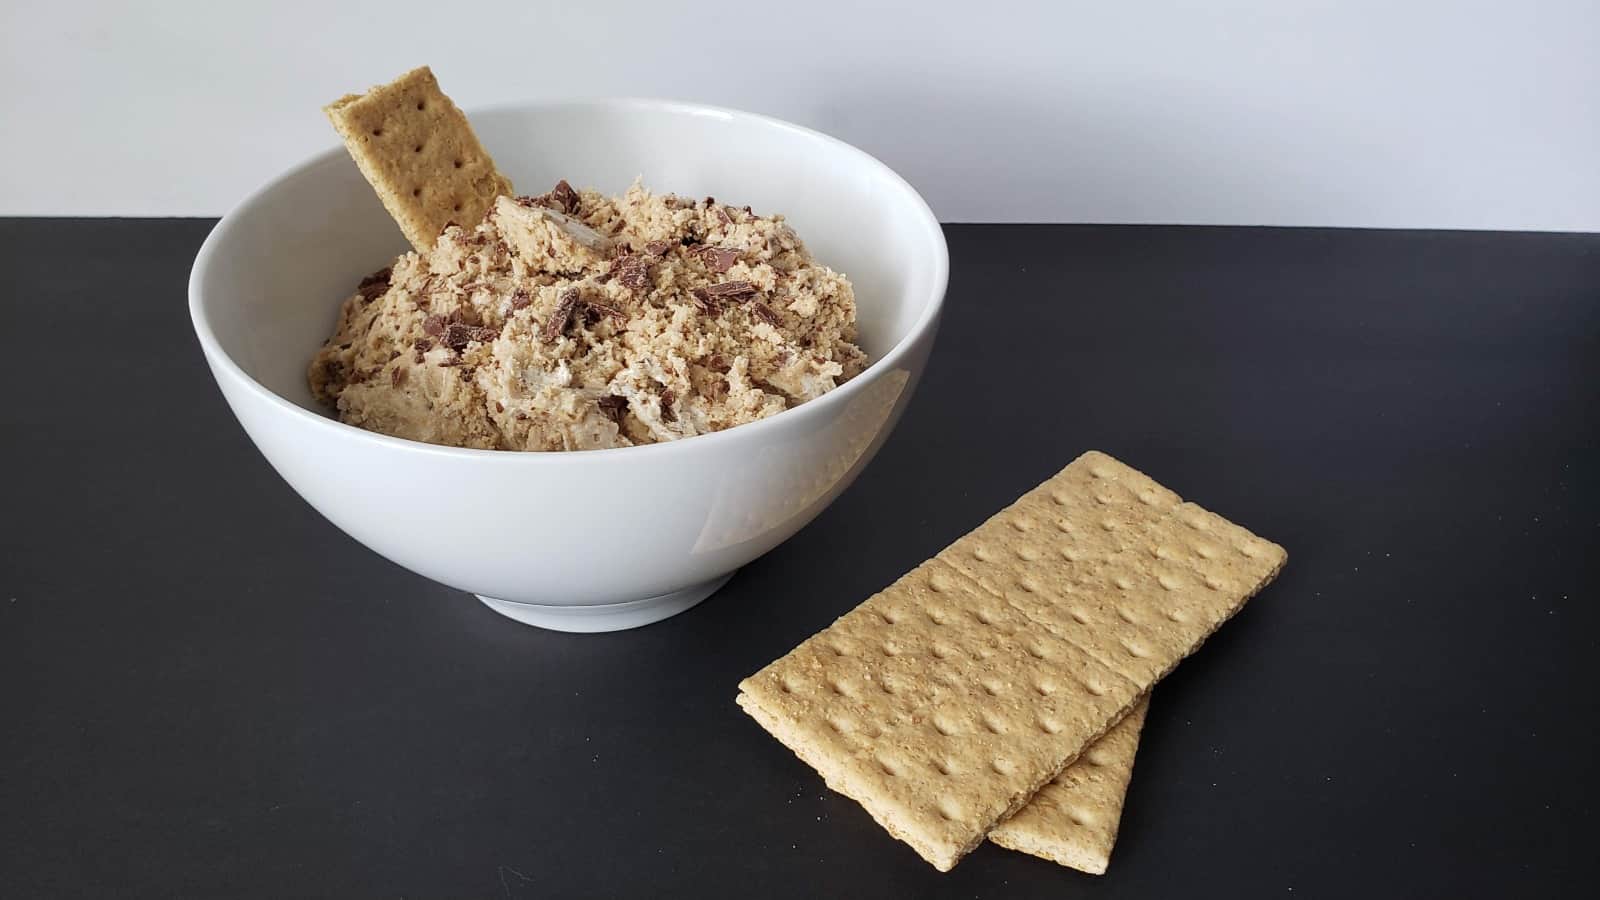 Photo shows a white bowl filled with edible chocolate chip cookie dough and graham crackers around it.